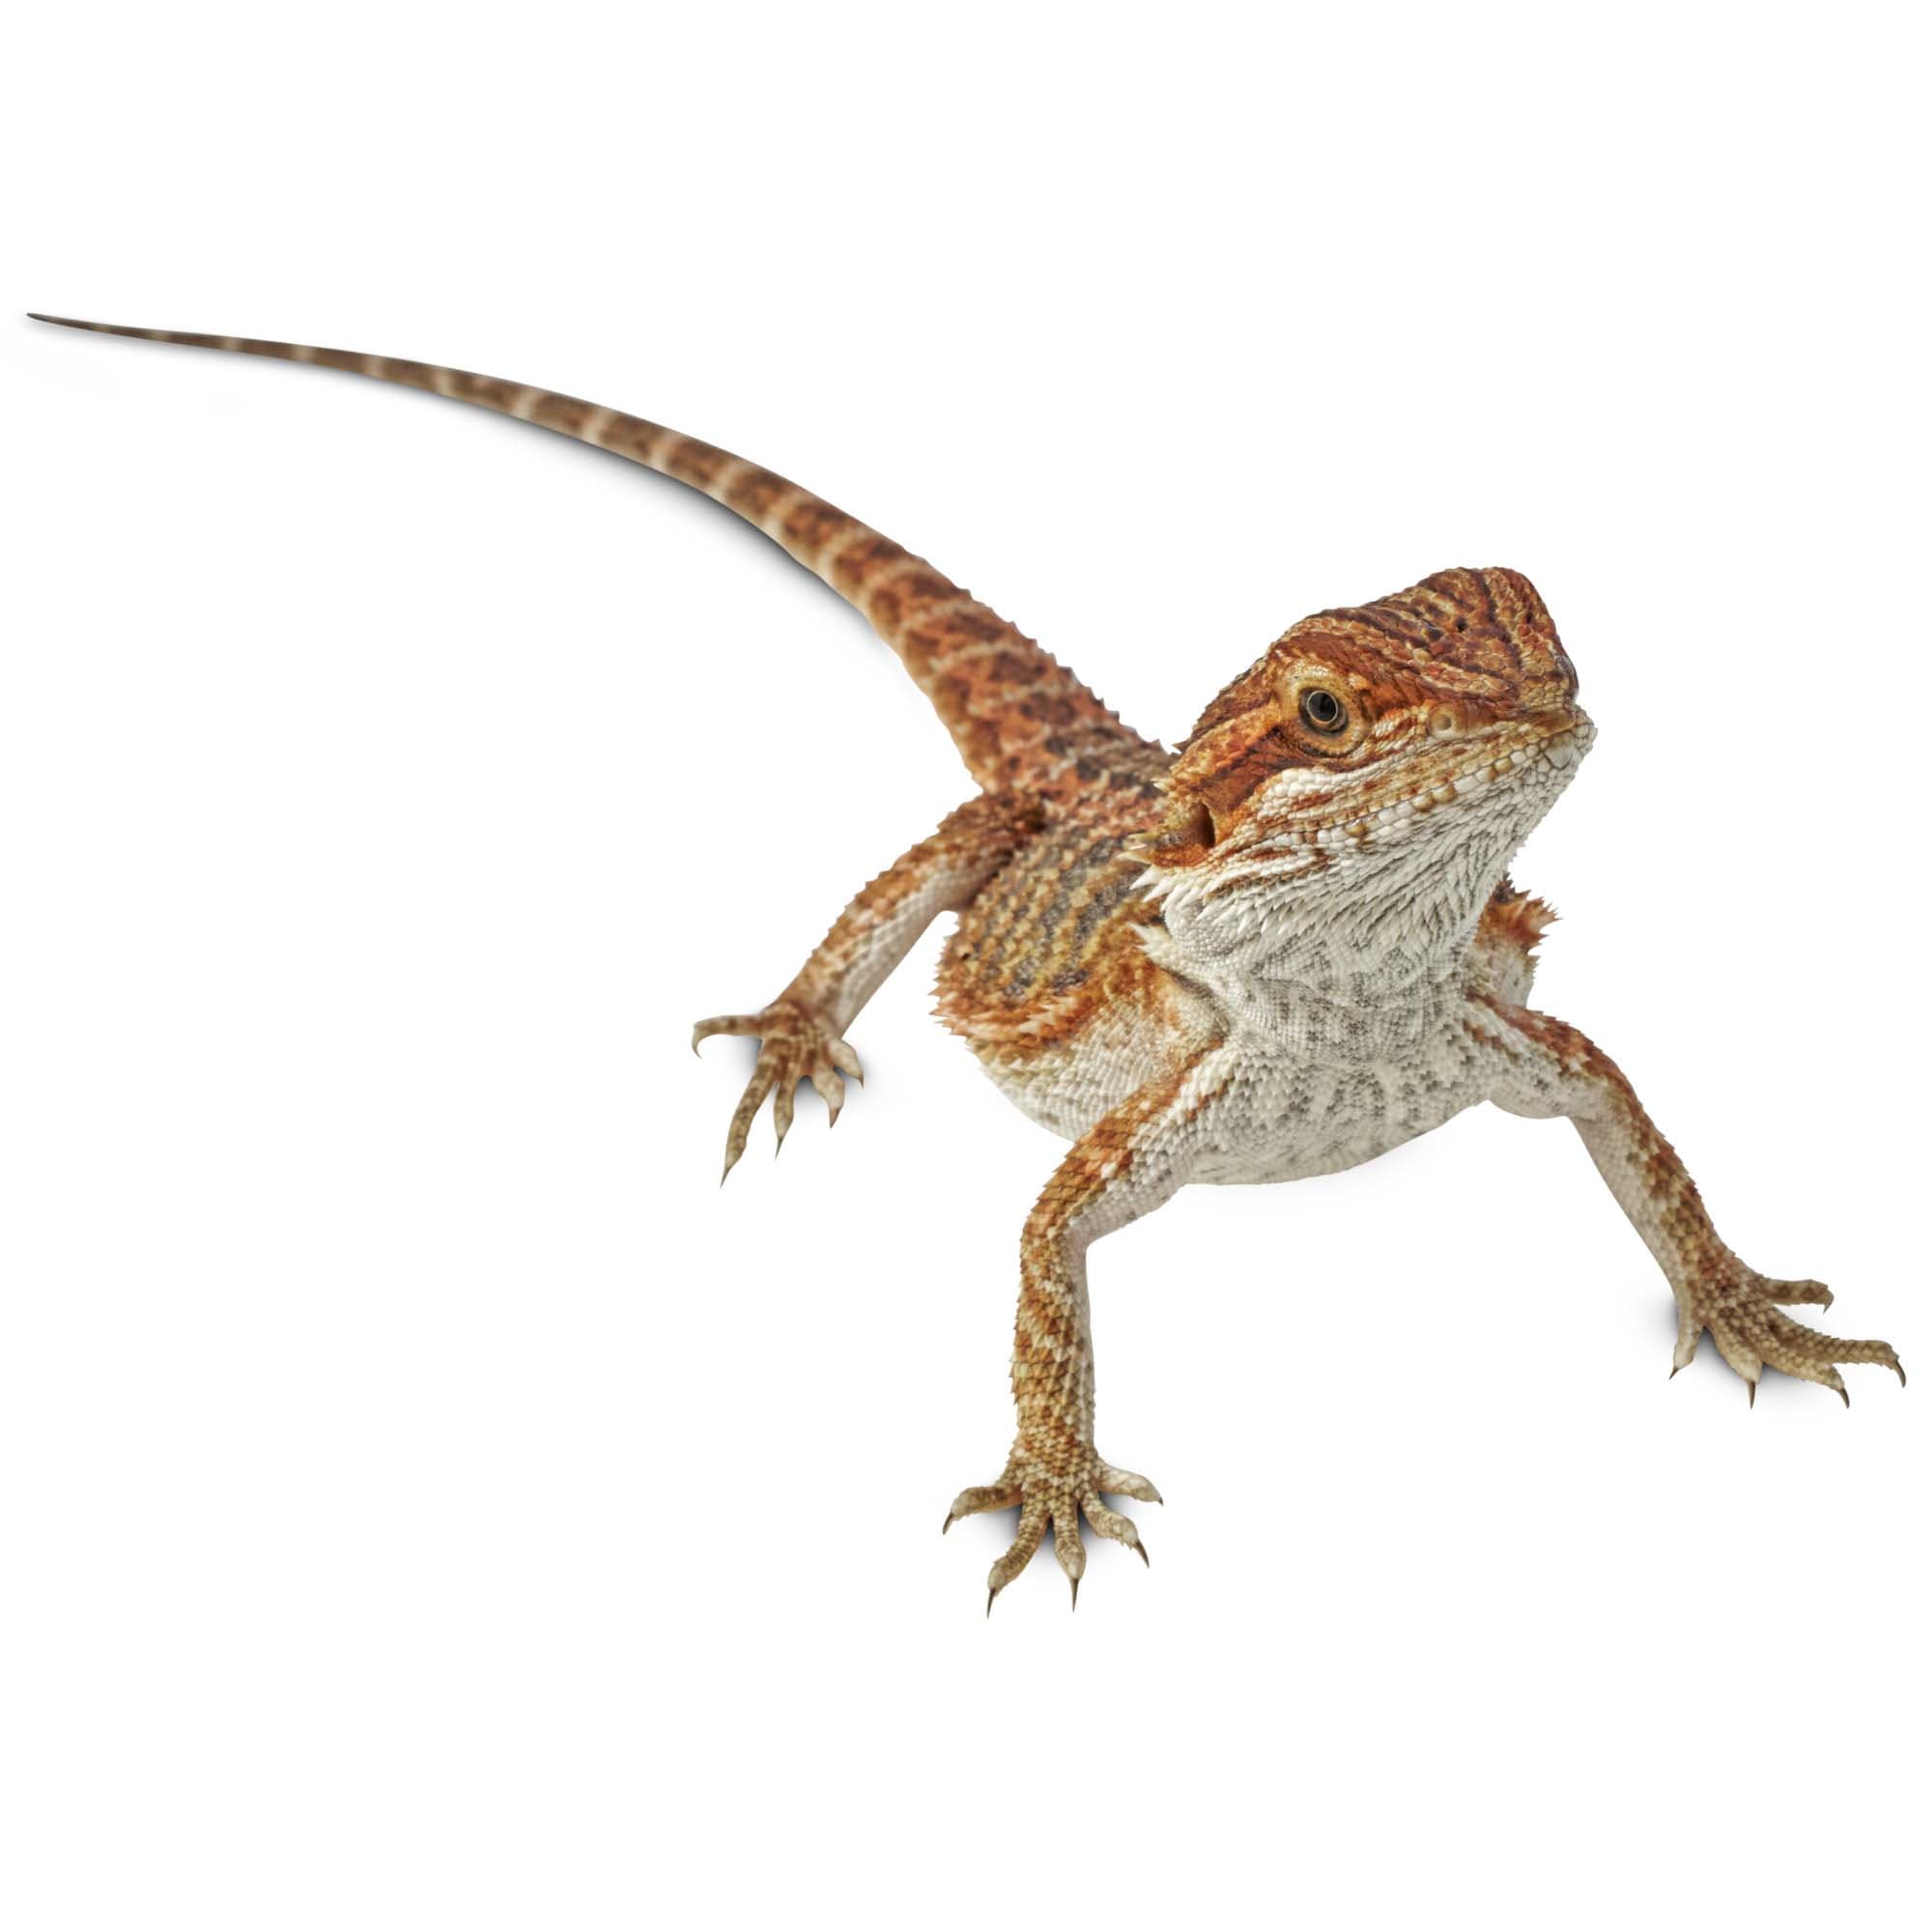 Buy Live Bearded Dragons For Sale Petco,Wafer Cookies Dipped In Chocolate